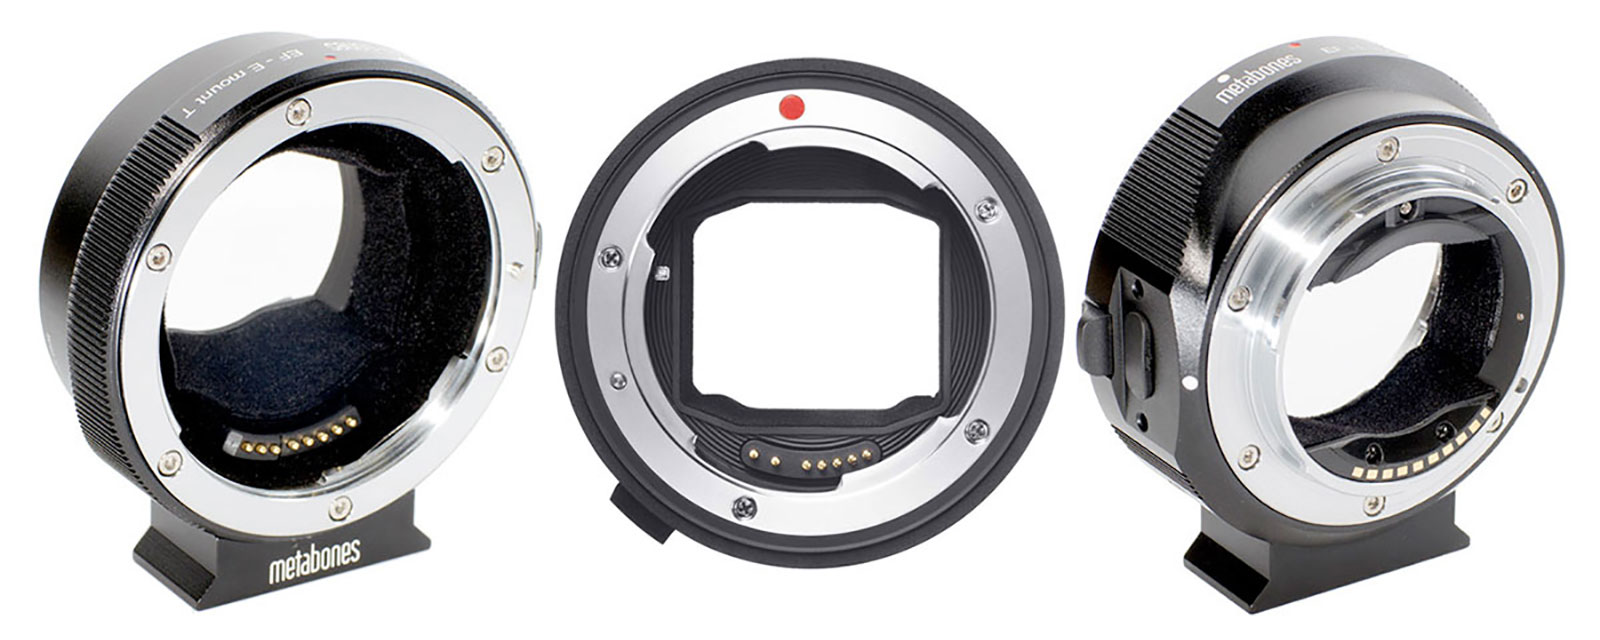 APS-C & Full Frame such as NEX-5, NEX-7 & a7 The TOUGH E-Mount LT from Fotodiox Pro A Light Tight Replacement Lens Mount for Sony NEX & E-mount Camera Bodies